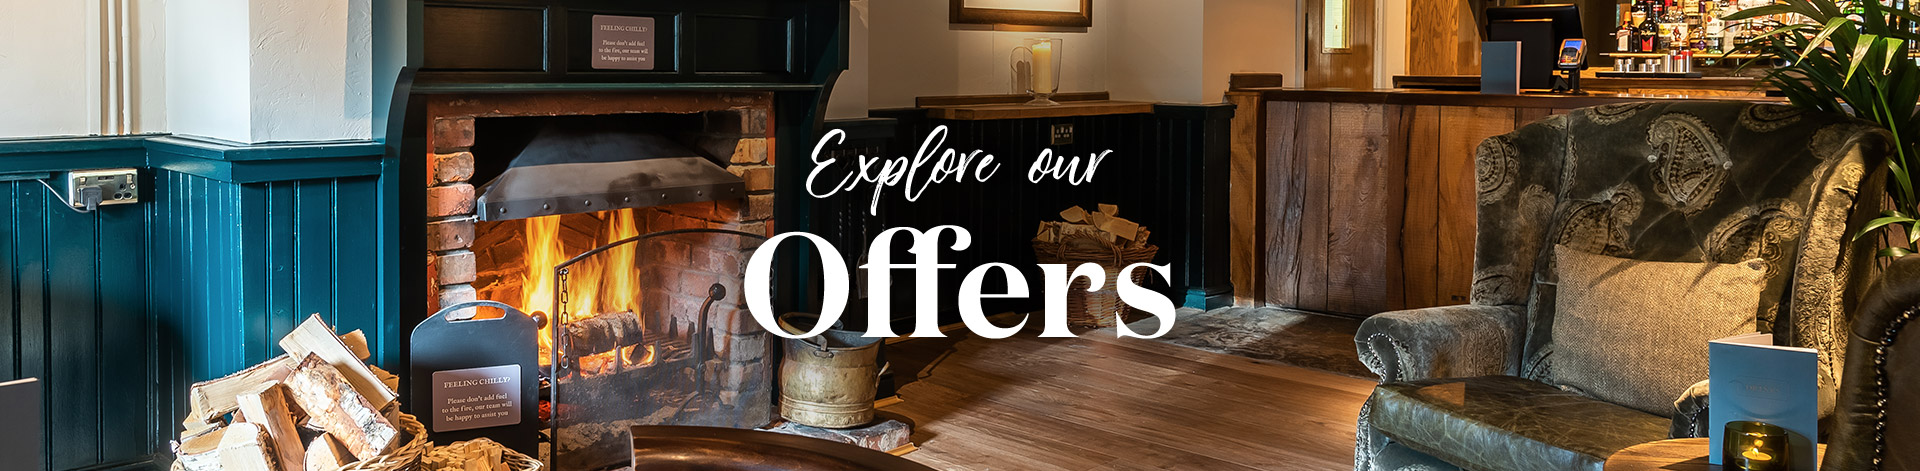 Our latest offers at The Fettykil Fox